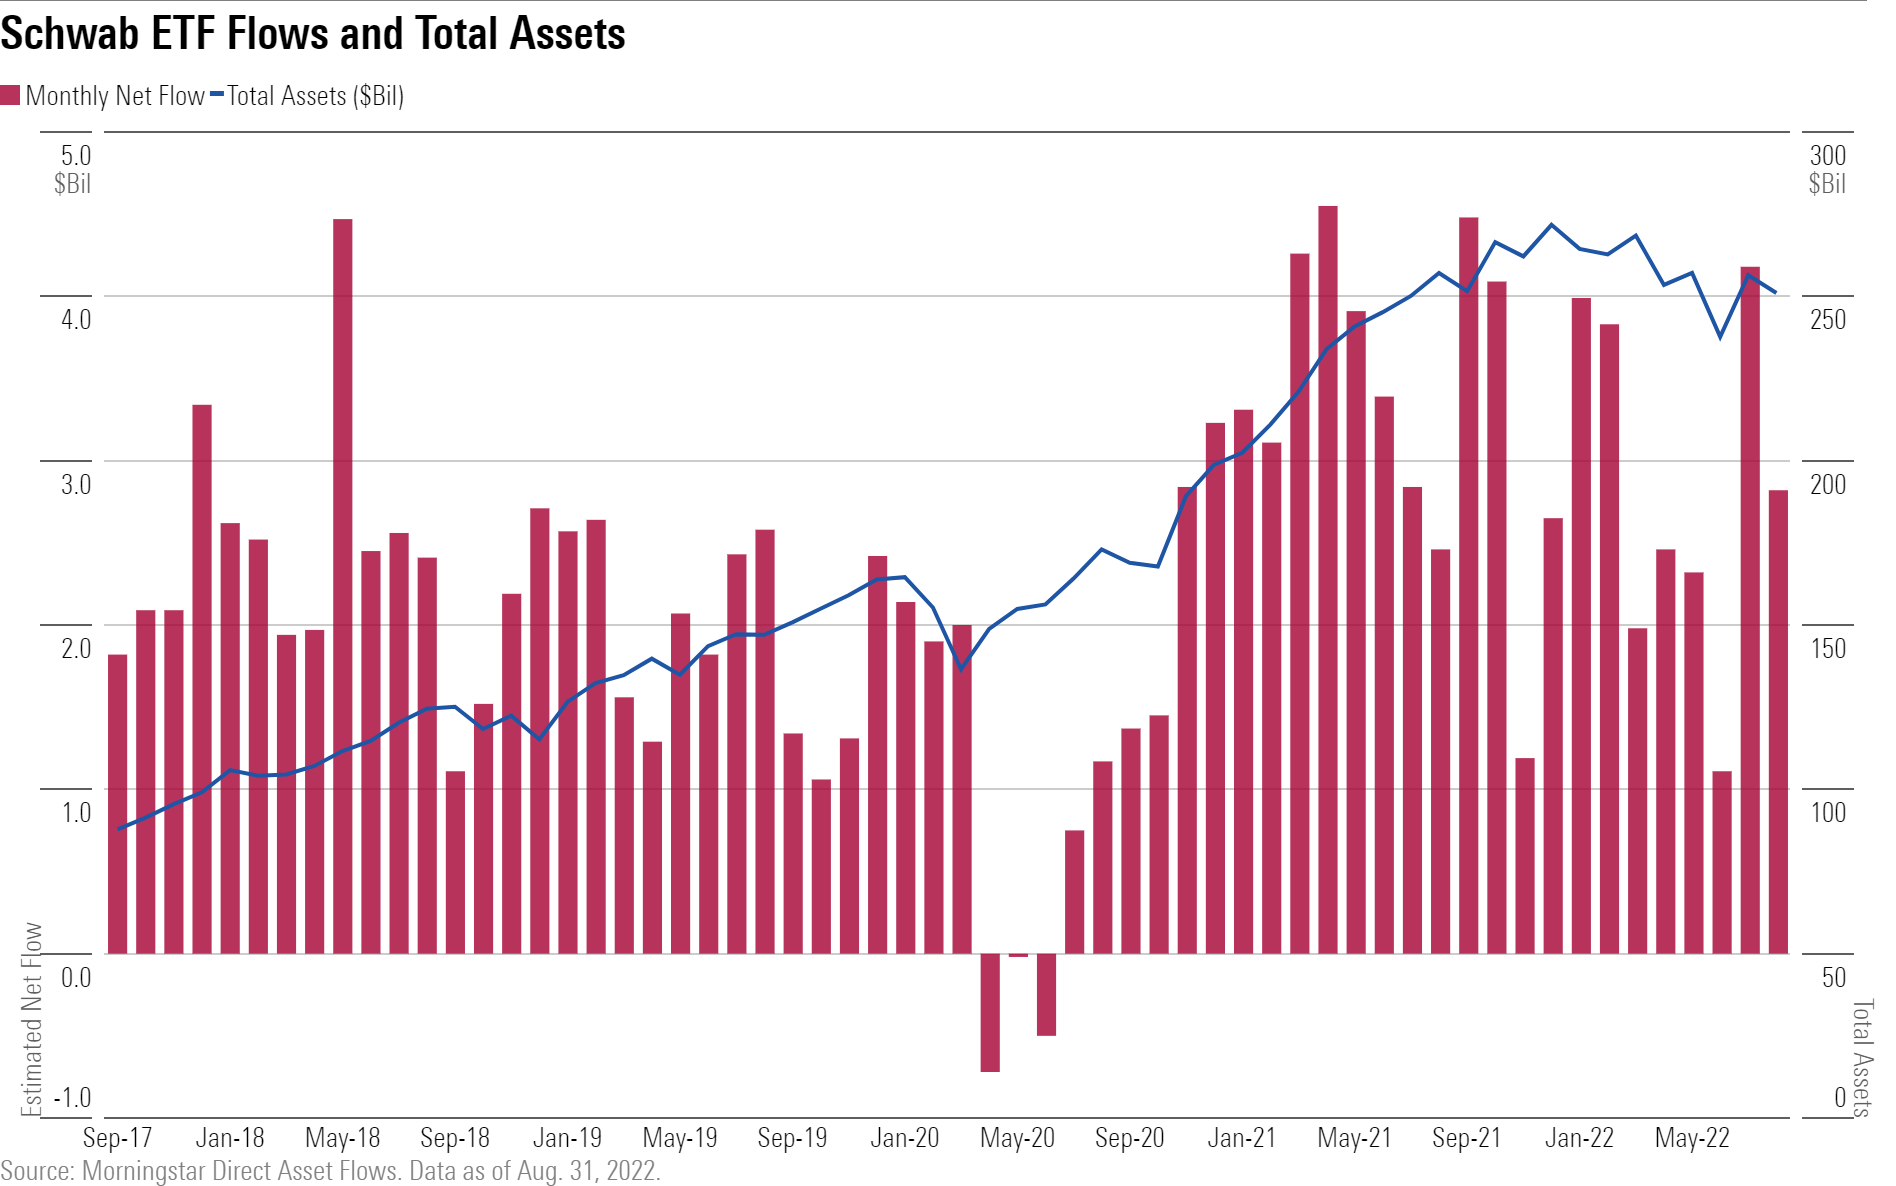 A bar chart of Schwab ETFs' monthly flows and assets over the past five years.